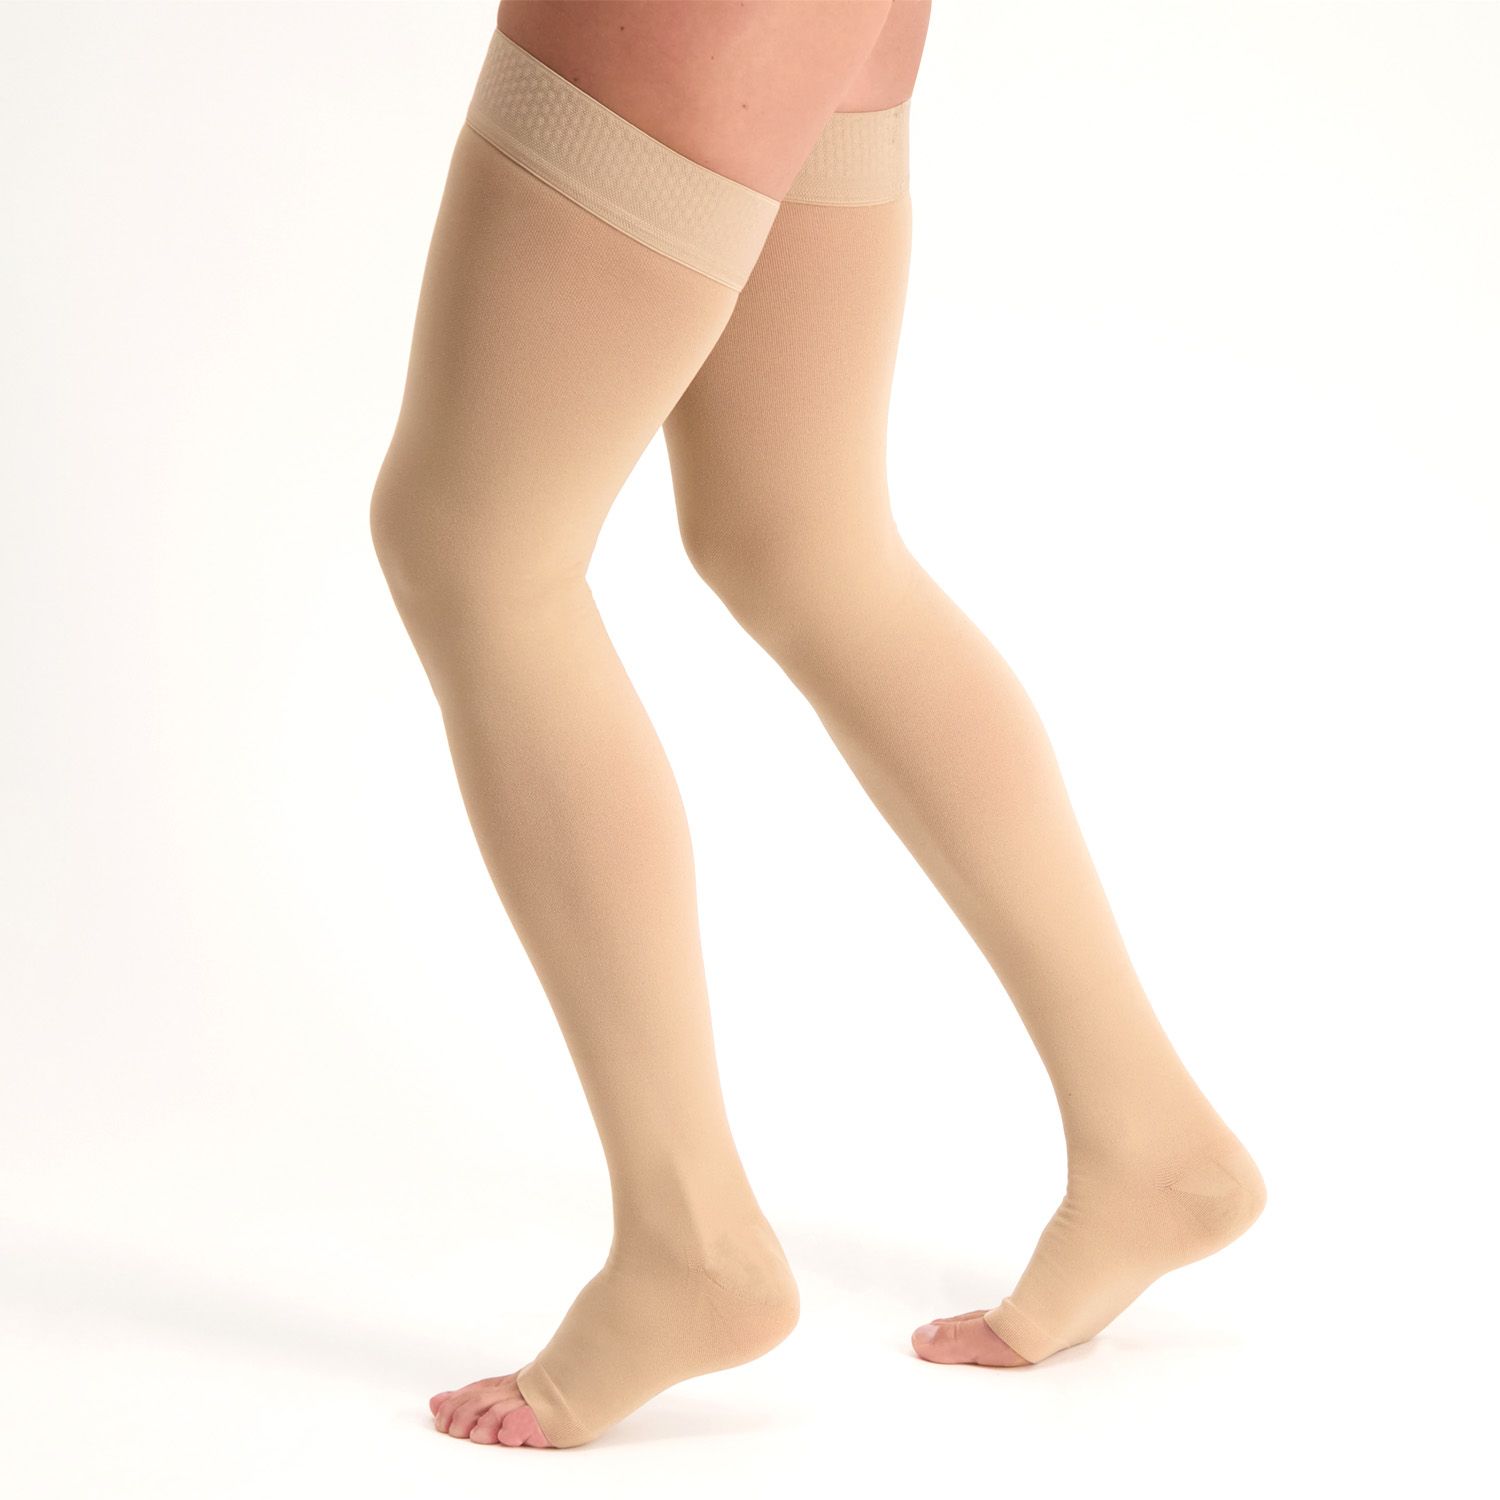 dunimed premium comfort compression stockings groin length open toe worn while seated